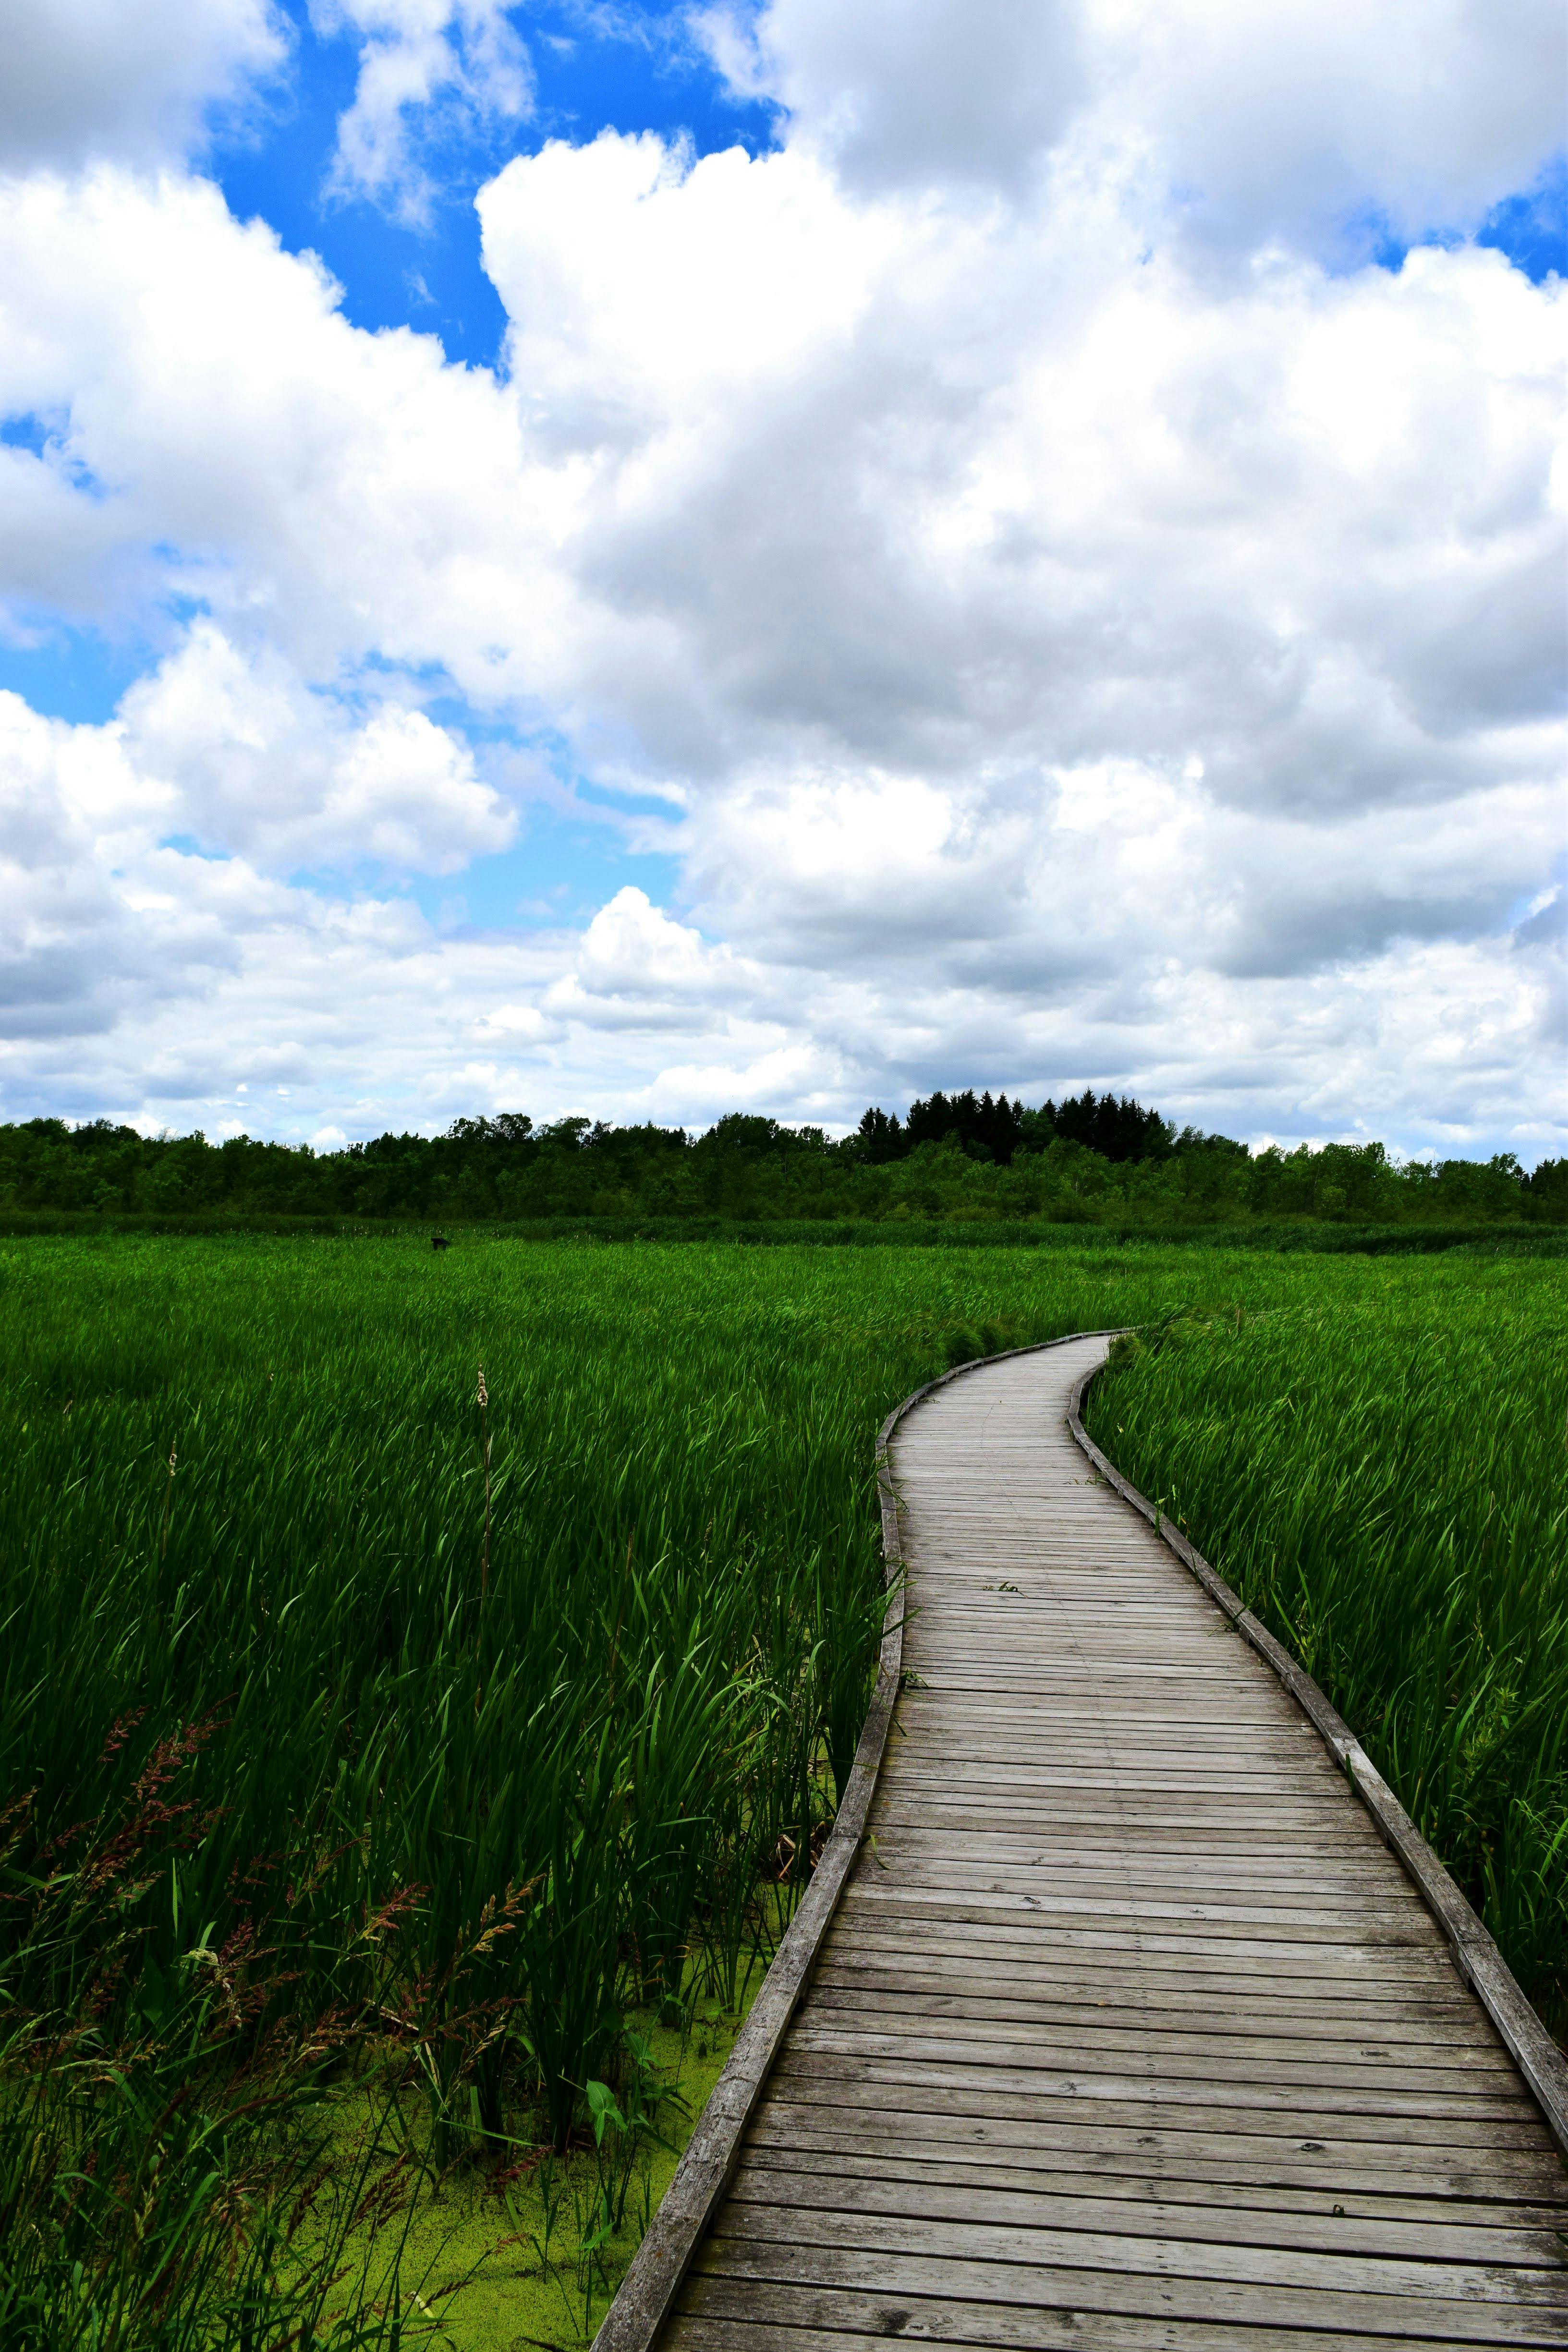 Free stock photo of grass, path, wooden path